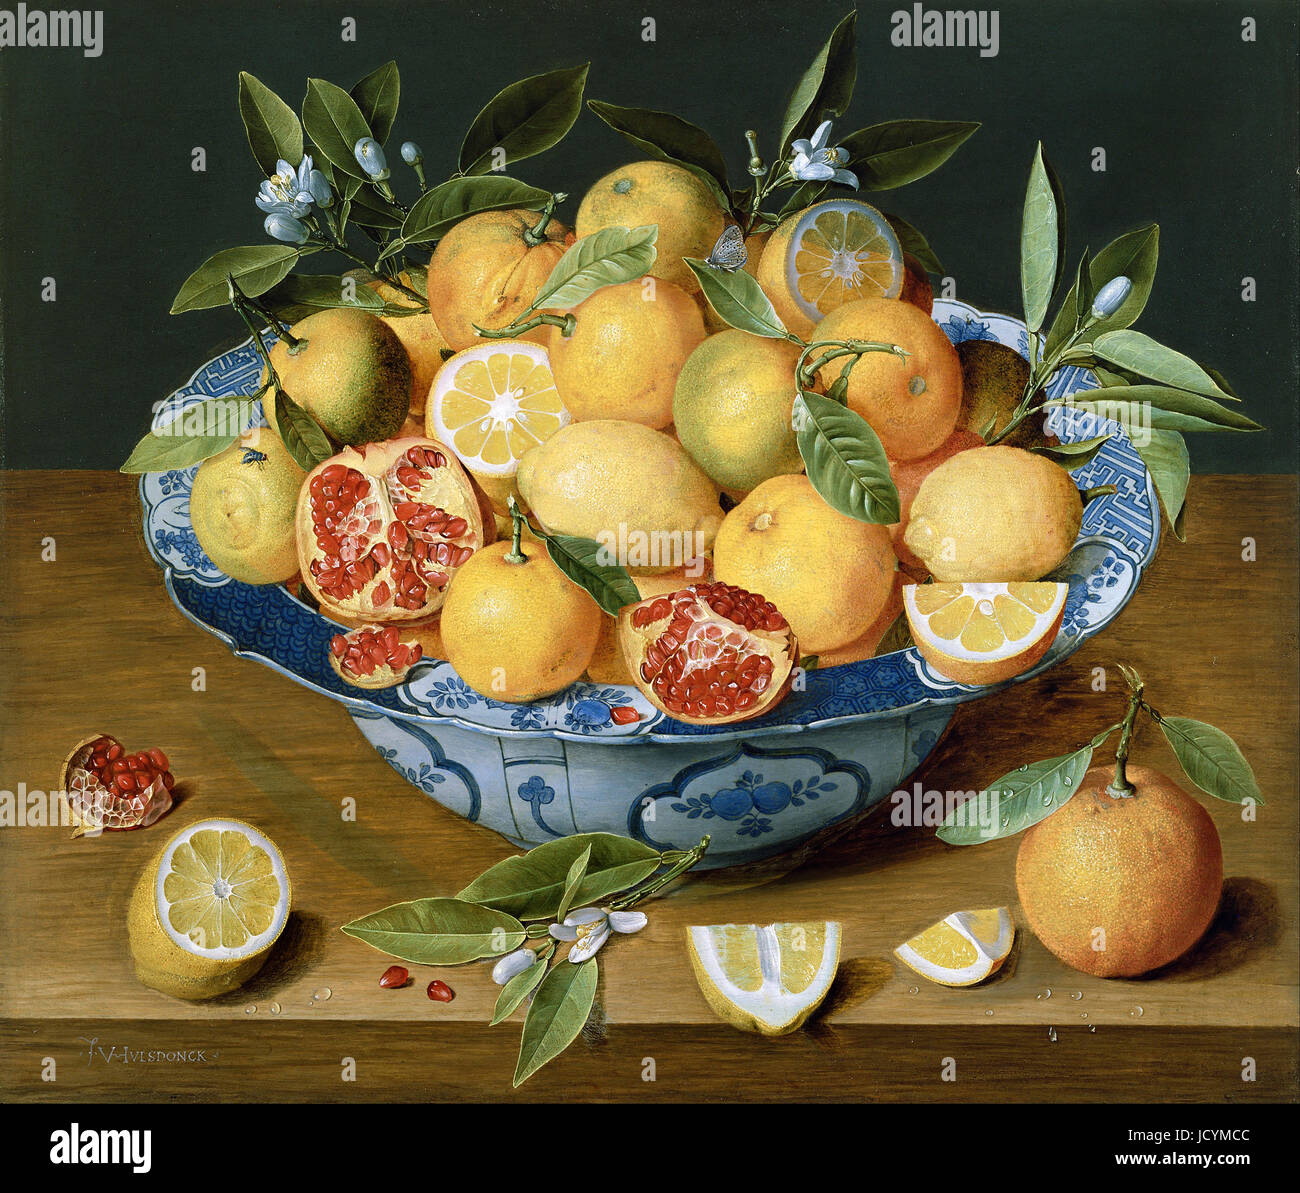 Jacob van Hulsdonck, Still Life with Lemons, Oranges and a Pomegranate. Circa 1620-1640. Oil on panel. The J. Paul Getty Museum, Los Angeles, USA. Stock Photo